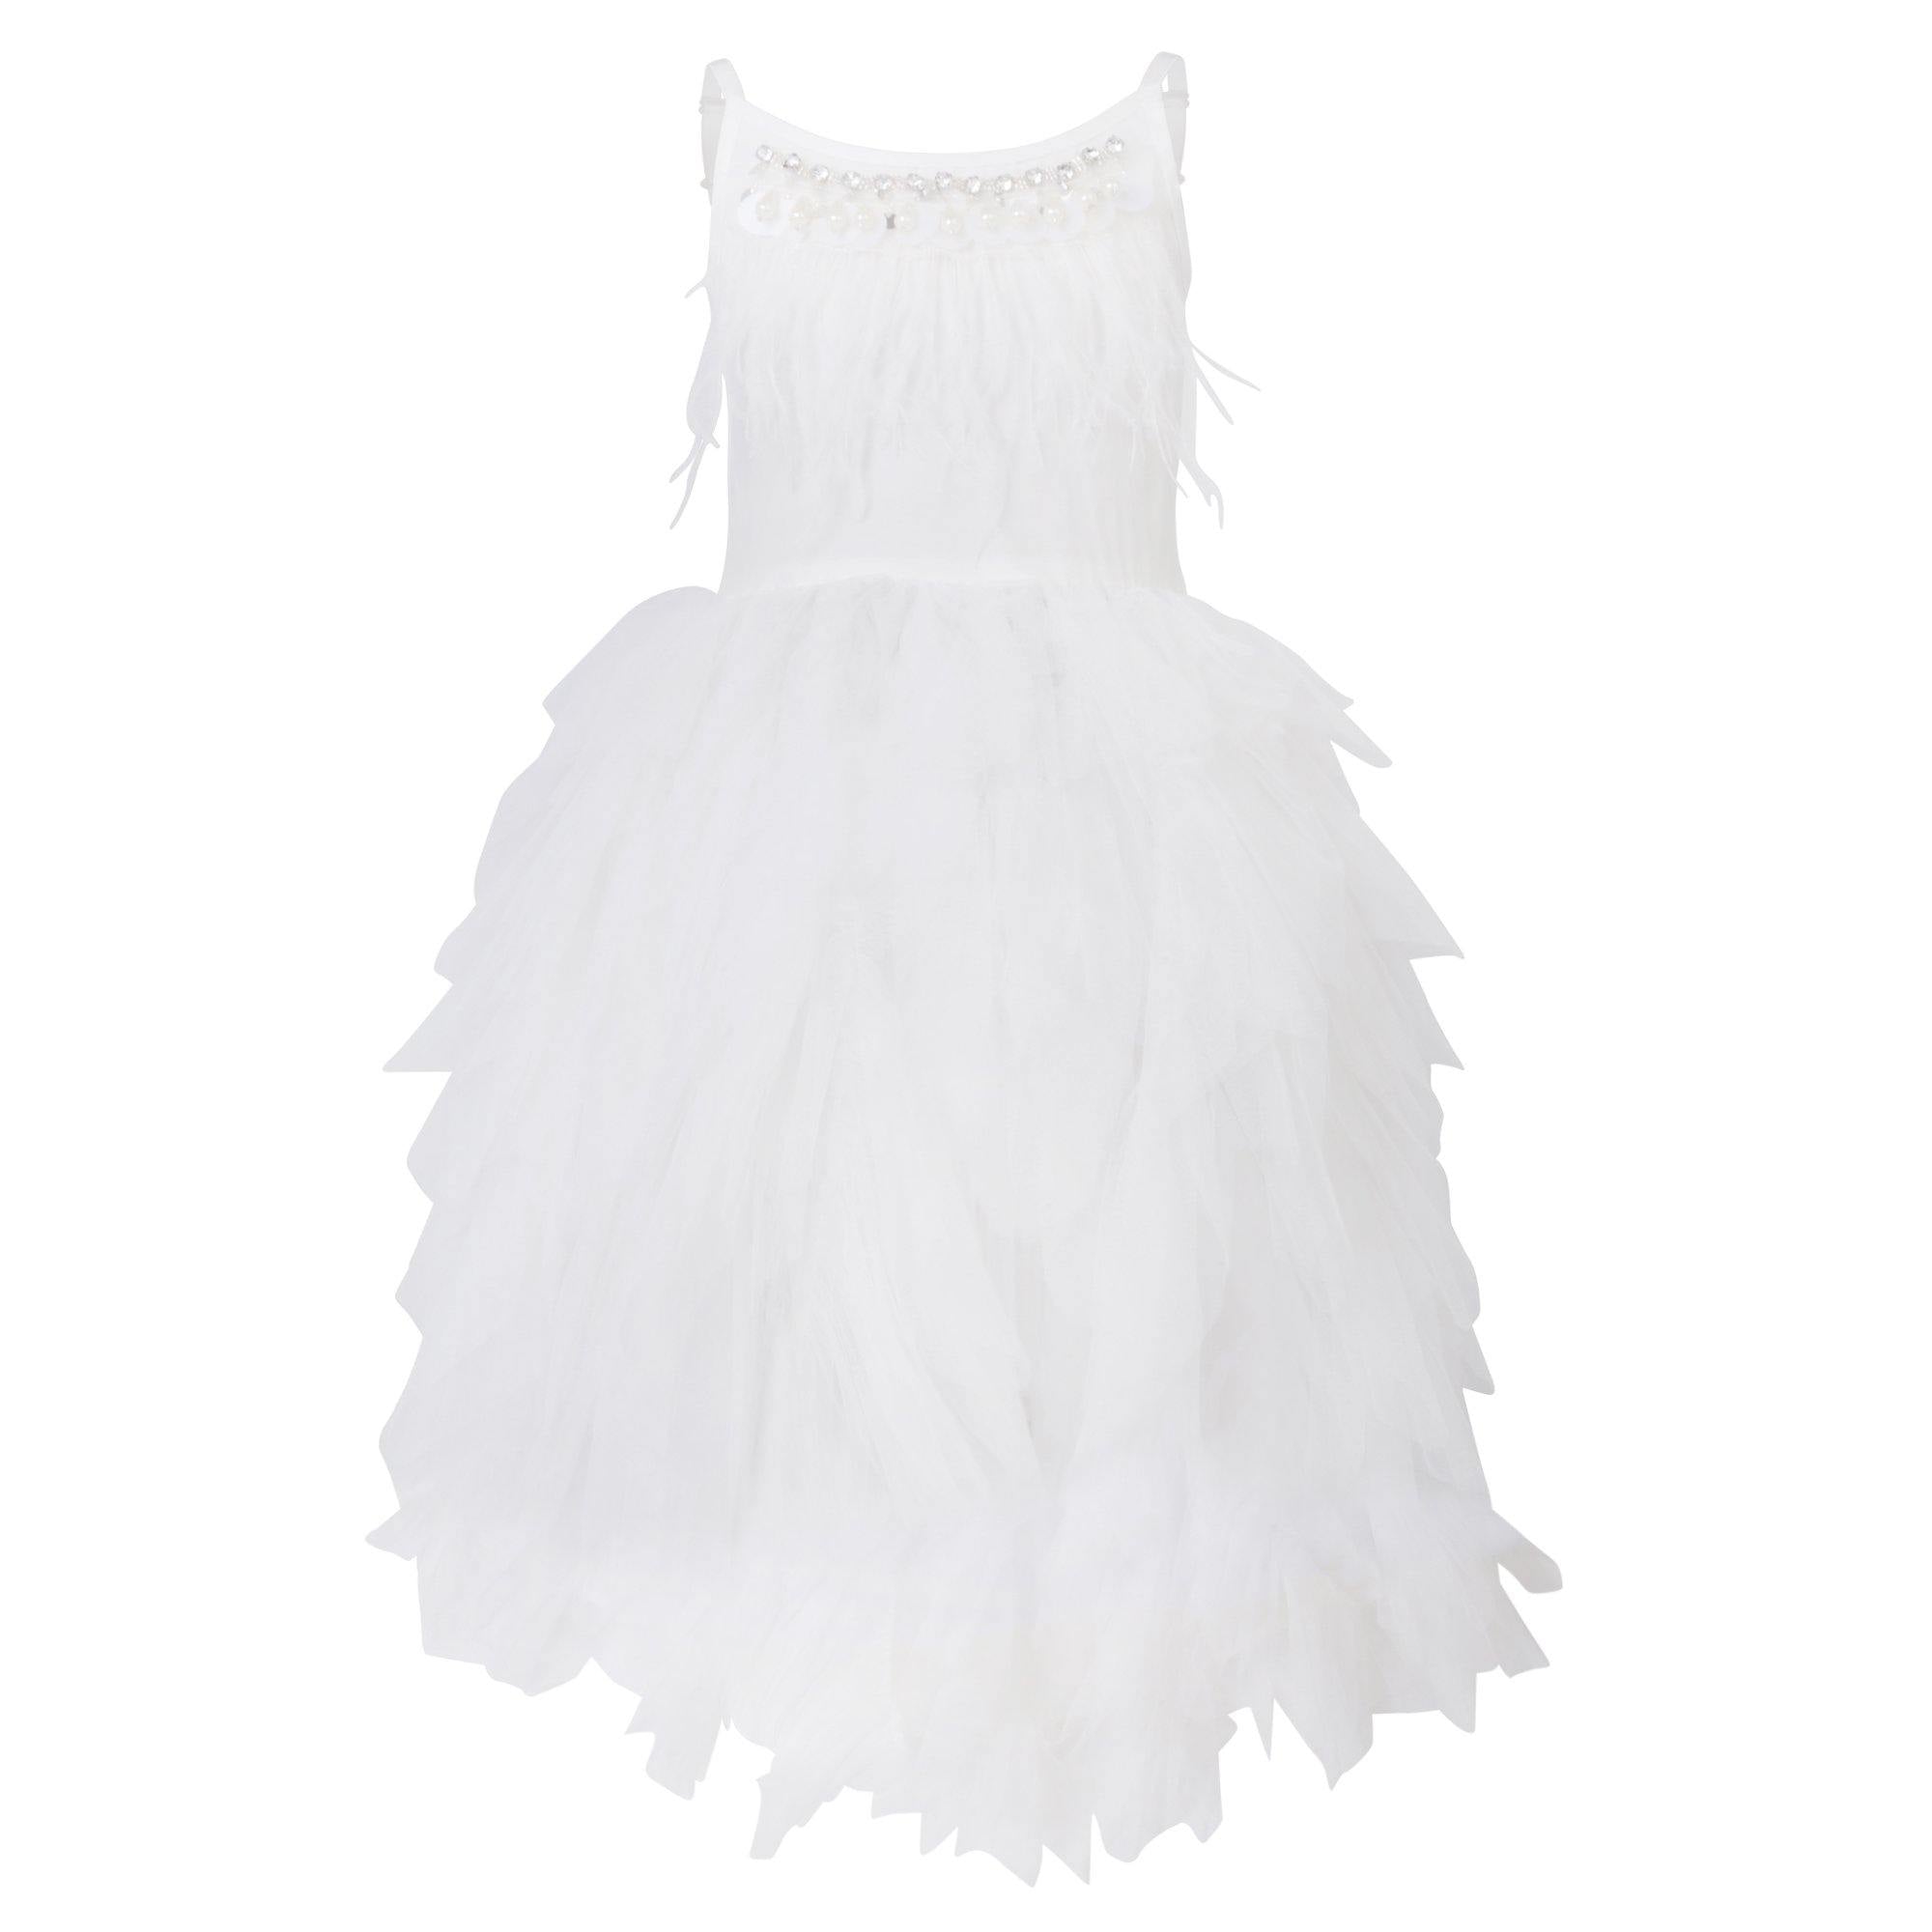 Feathers and Frills Dress in White